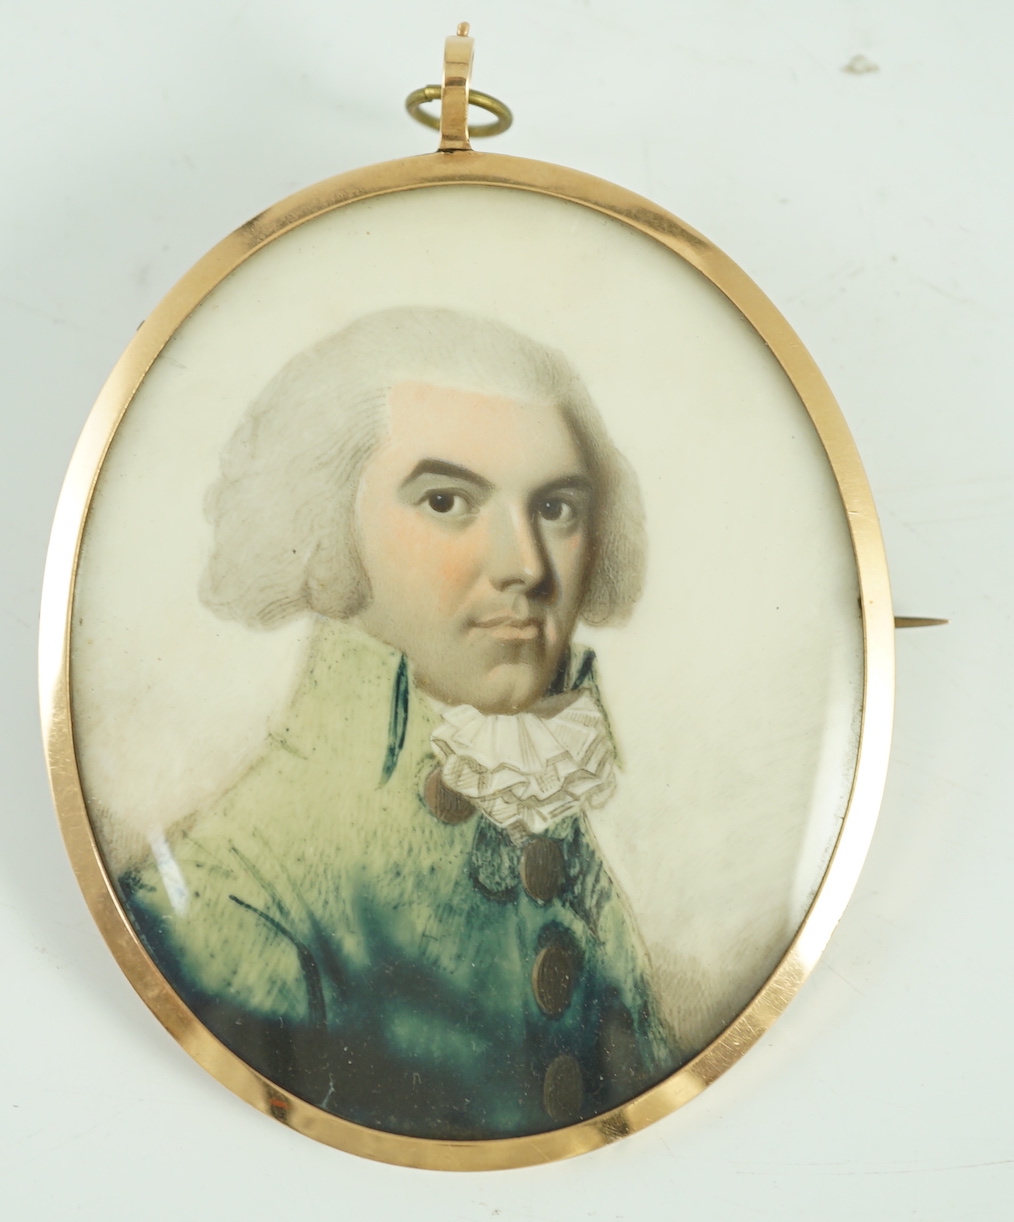 John Barry (fl.1784-1817), Portrait miniature of a gentleman, watercolour on ivory, 6.5 x 5.5cm CITES Submission reference GJY3XKA9